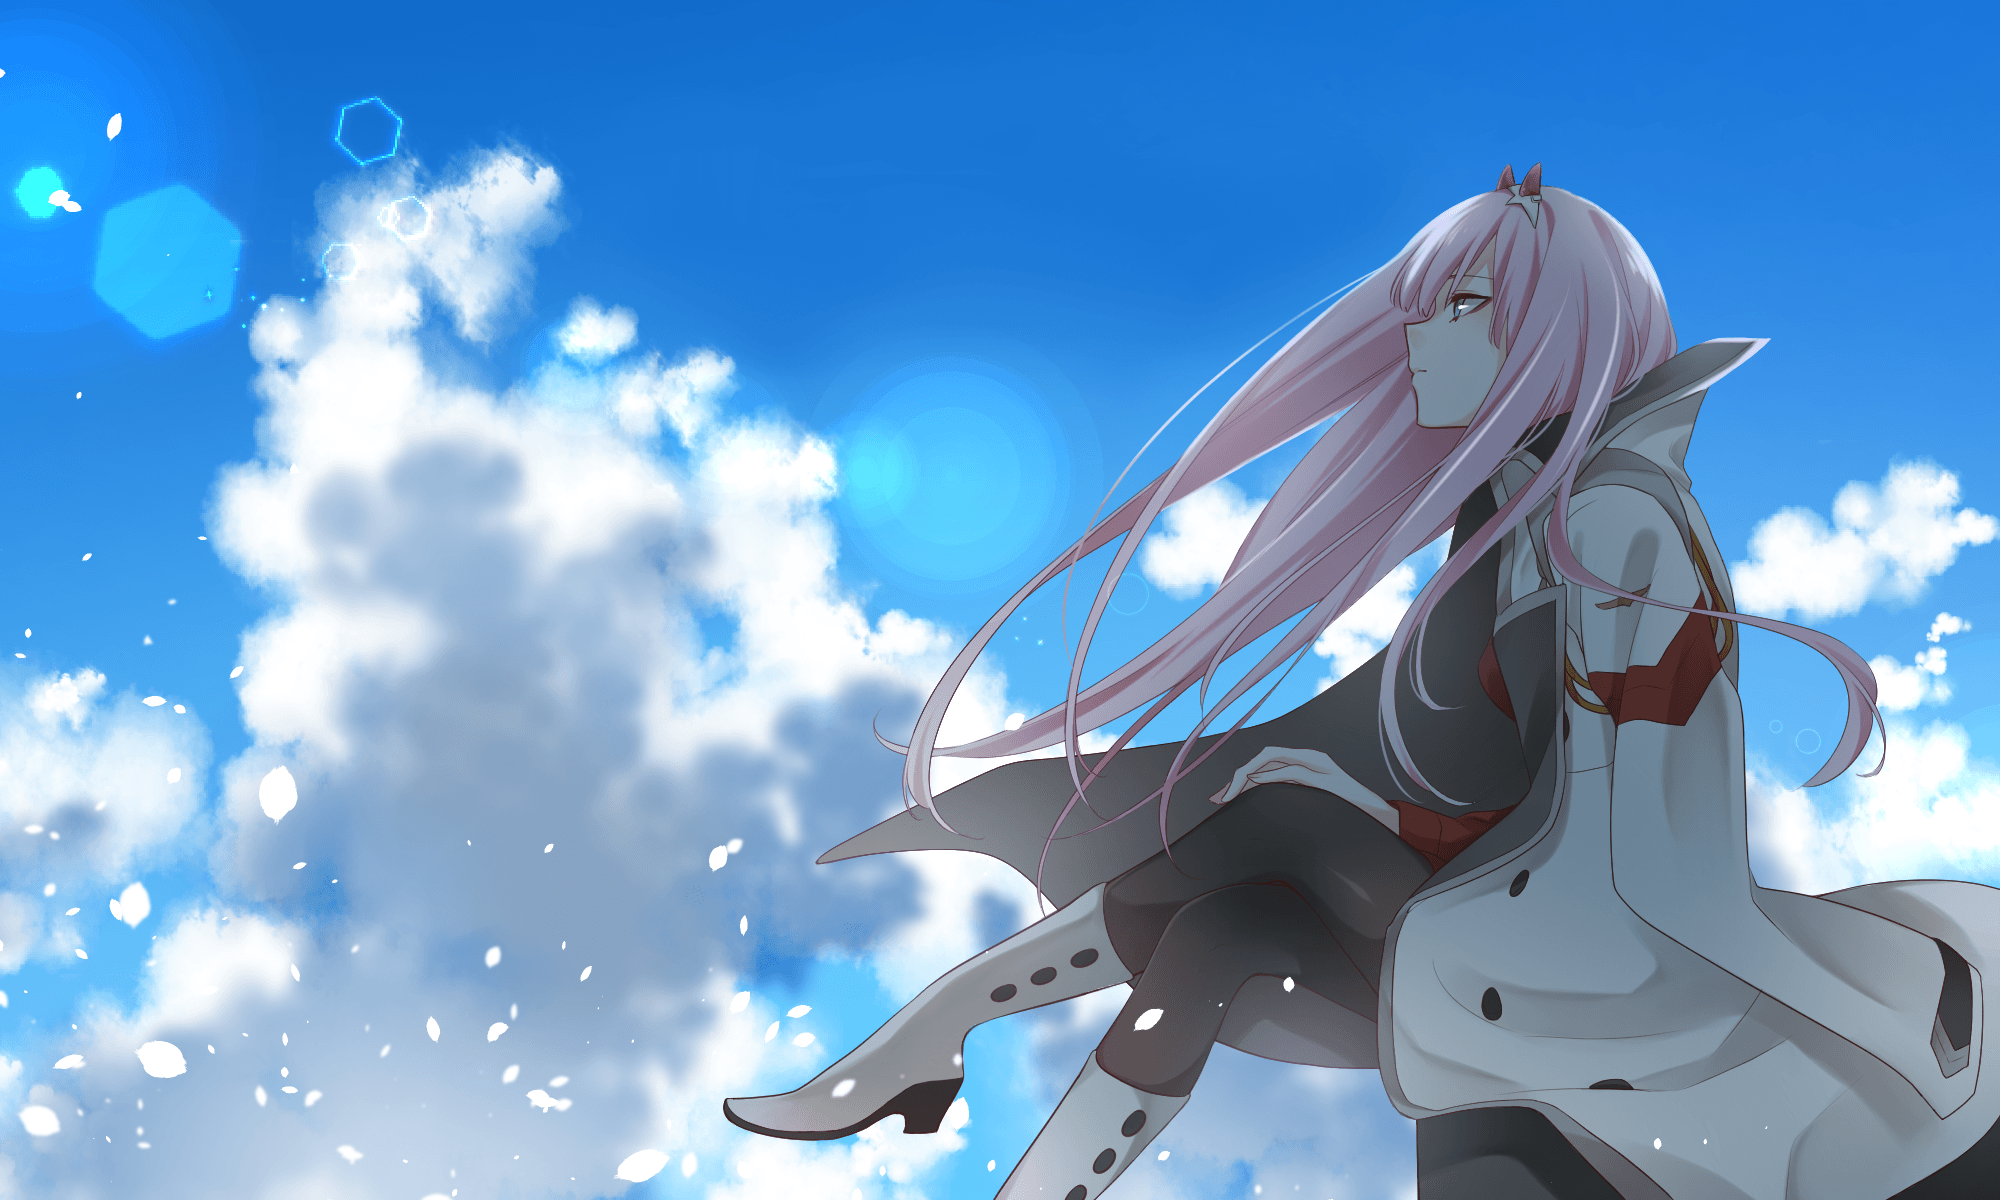 Zero Two HD Wallpaper [2000x1200] Ask for other resolutions